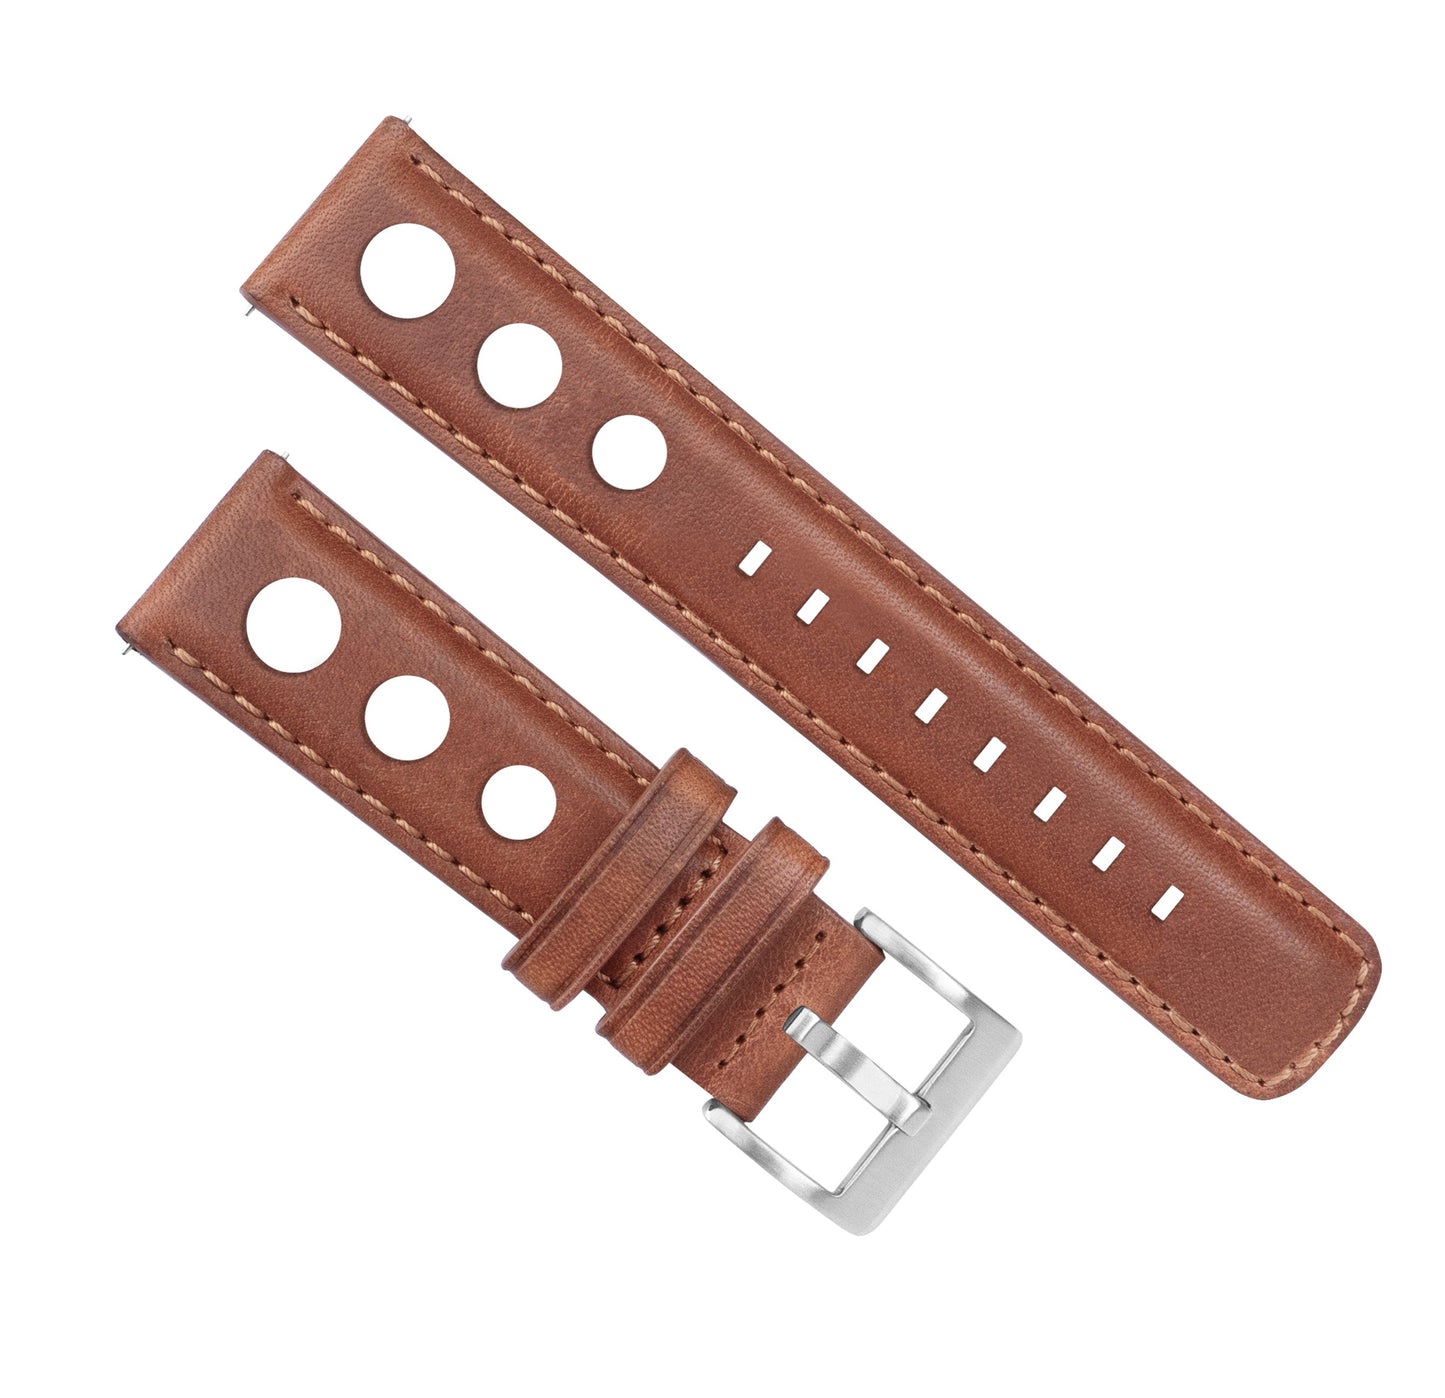 MOONSWATCH Bip | Rally Horween Leather | Caramel Brown - Barton Watch Bands